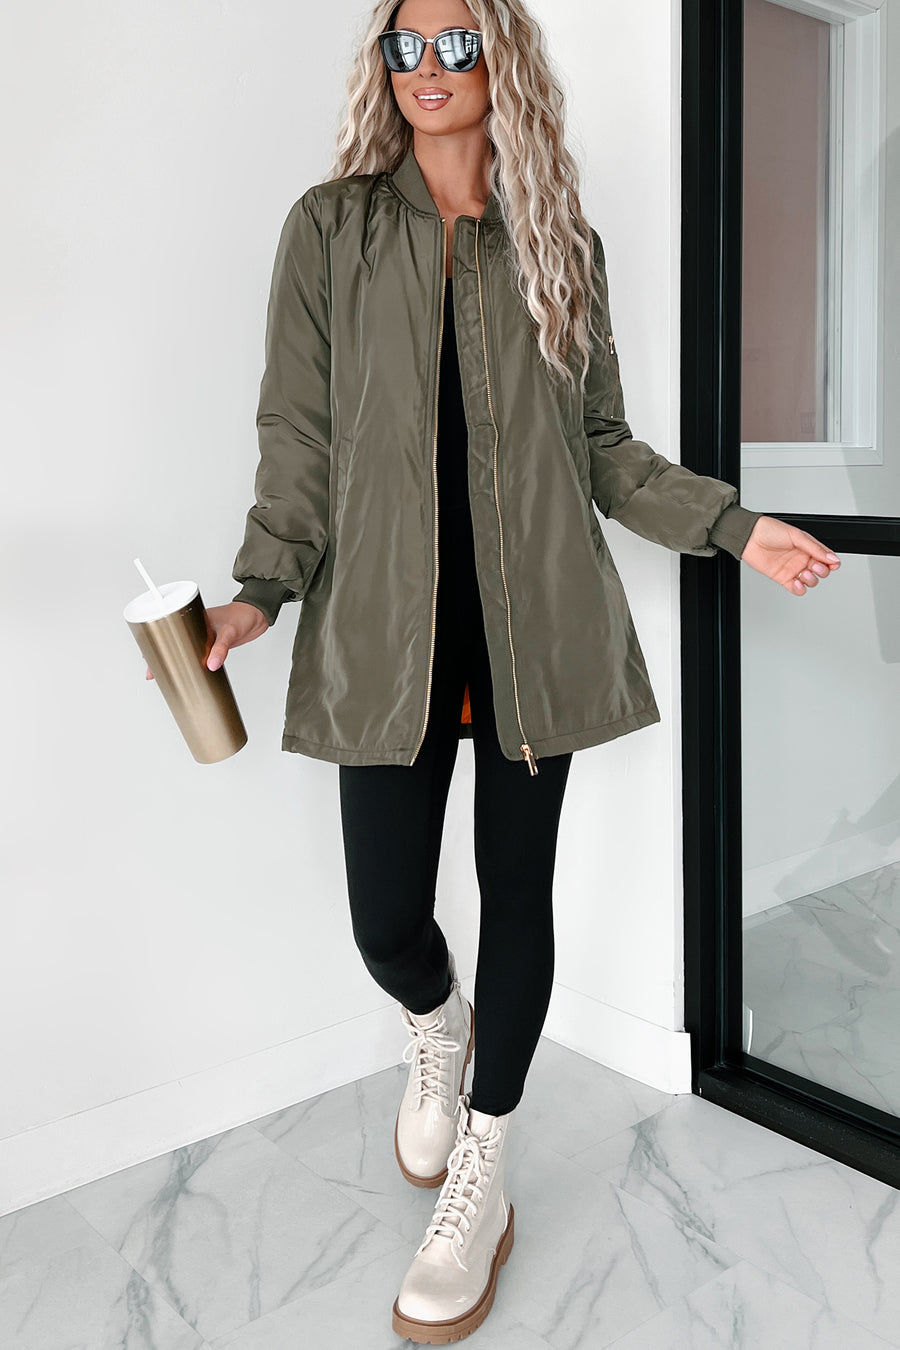 Coming In With Confidence Longline Bomber Jacket (Olive) - NanaMacs